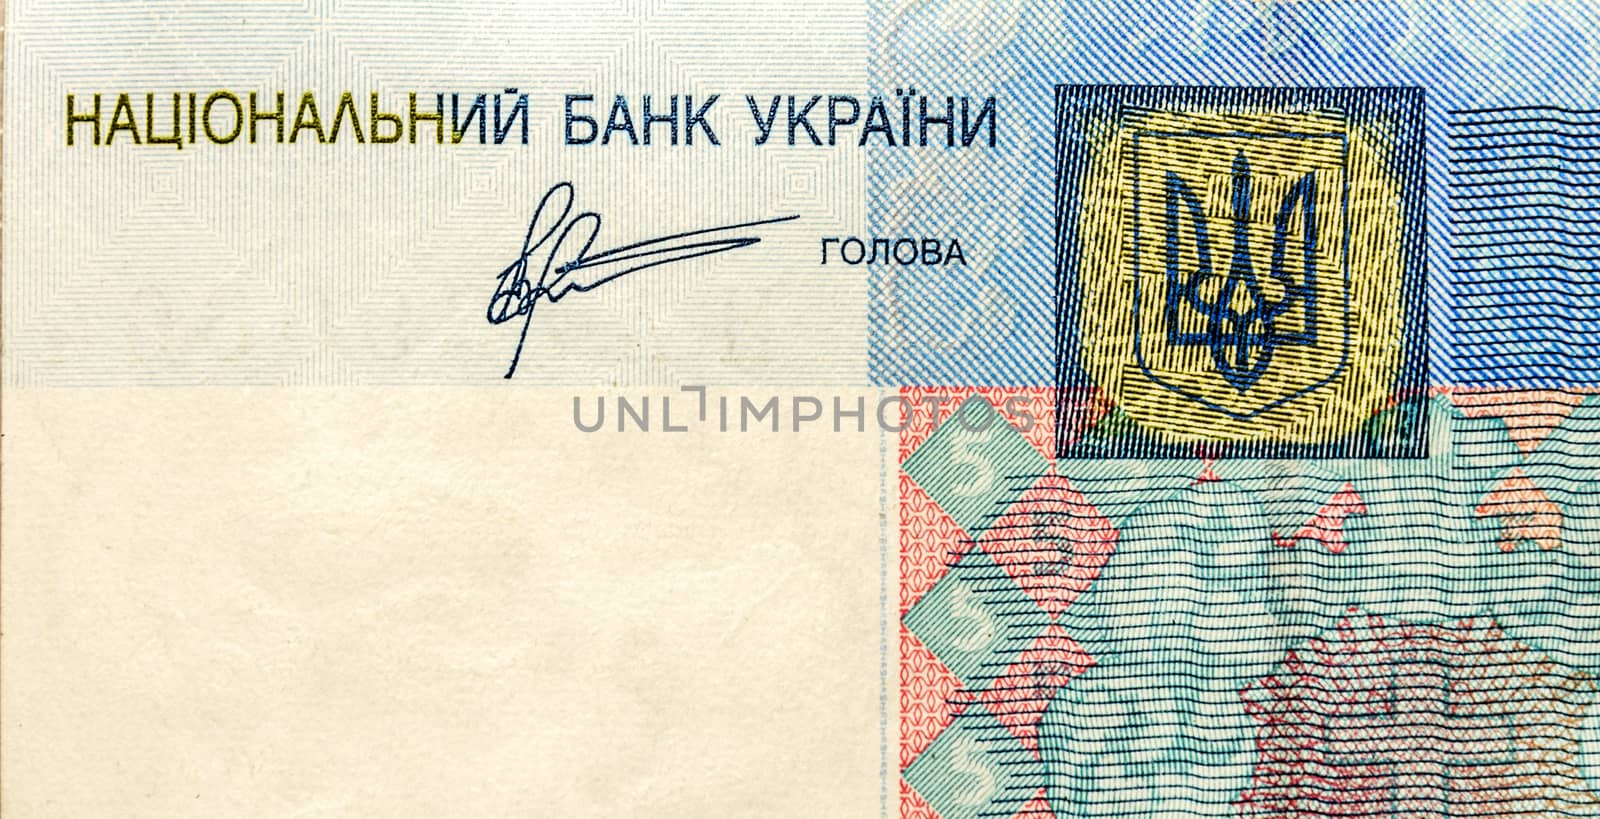 Part five hryvnia banknotes with the inscription National Bank of Ukraine

